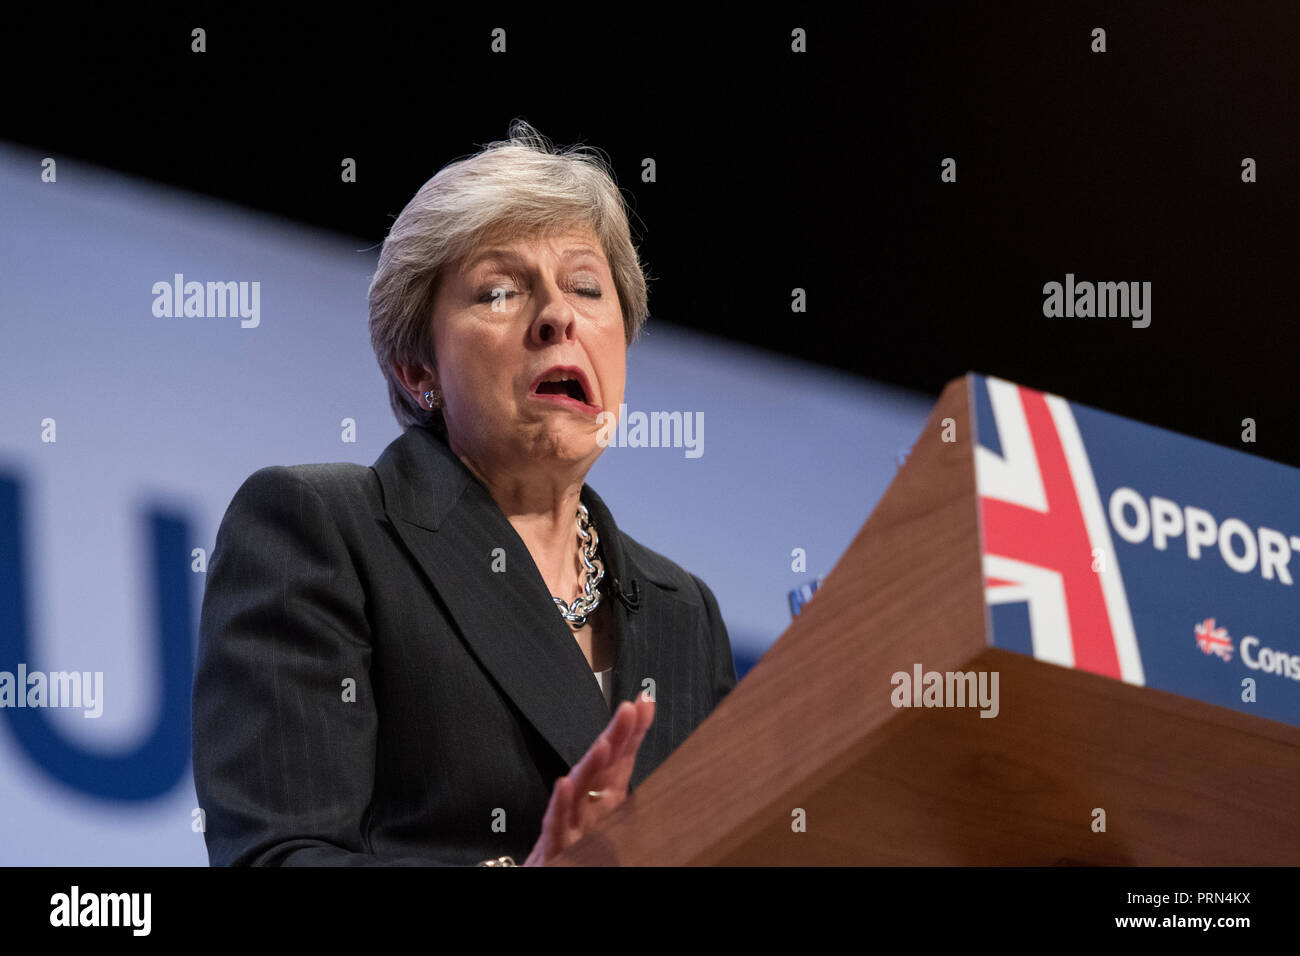 Birmingham, UK. 3 October 2018 - Prime Minister Theresa May pulls a funny  face whilst she delivers her speech at Conservative Party Conference 2018  in Birmingham, UK. Credit: Benjamin Wareing/Alamy Live News